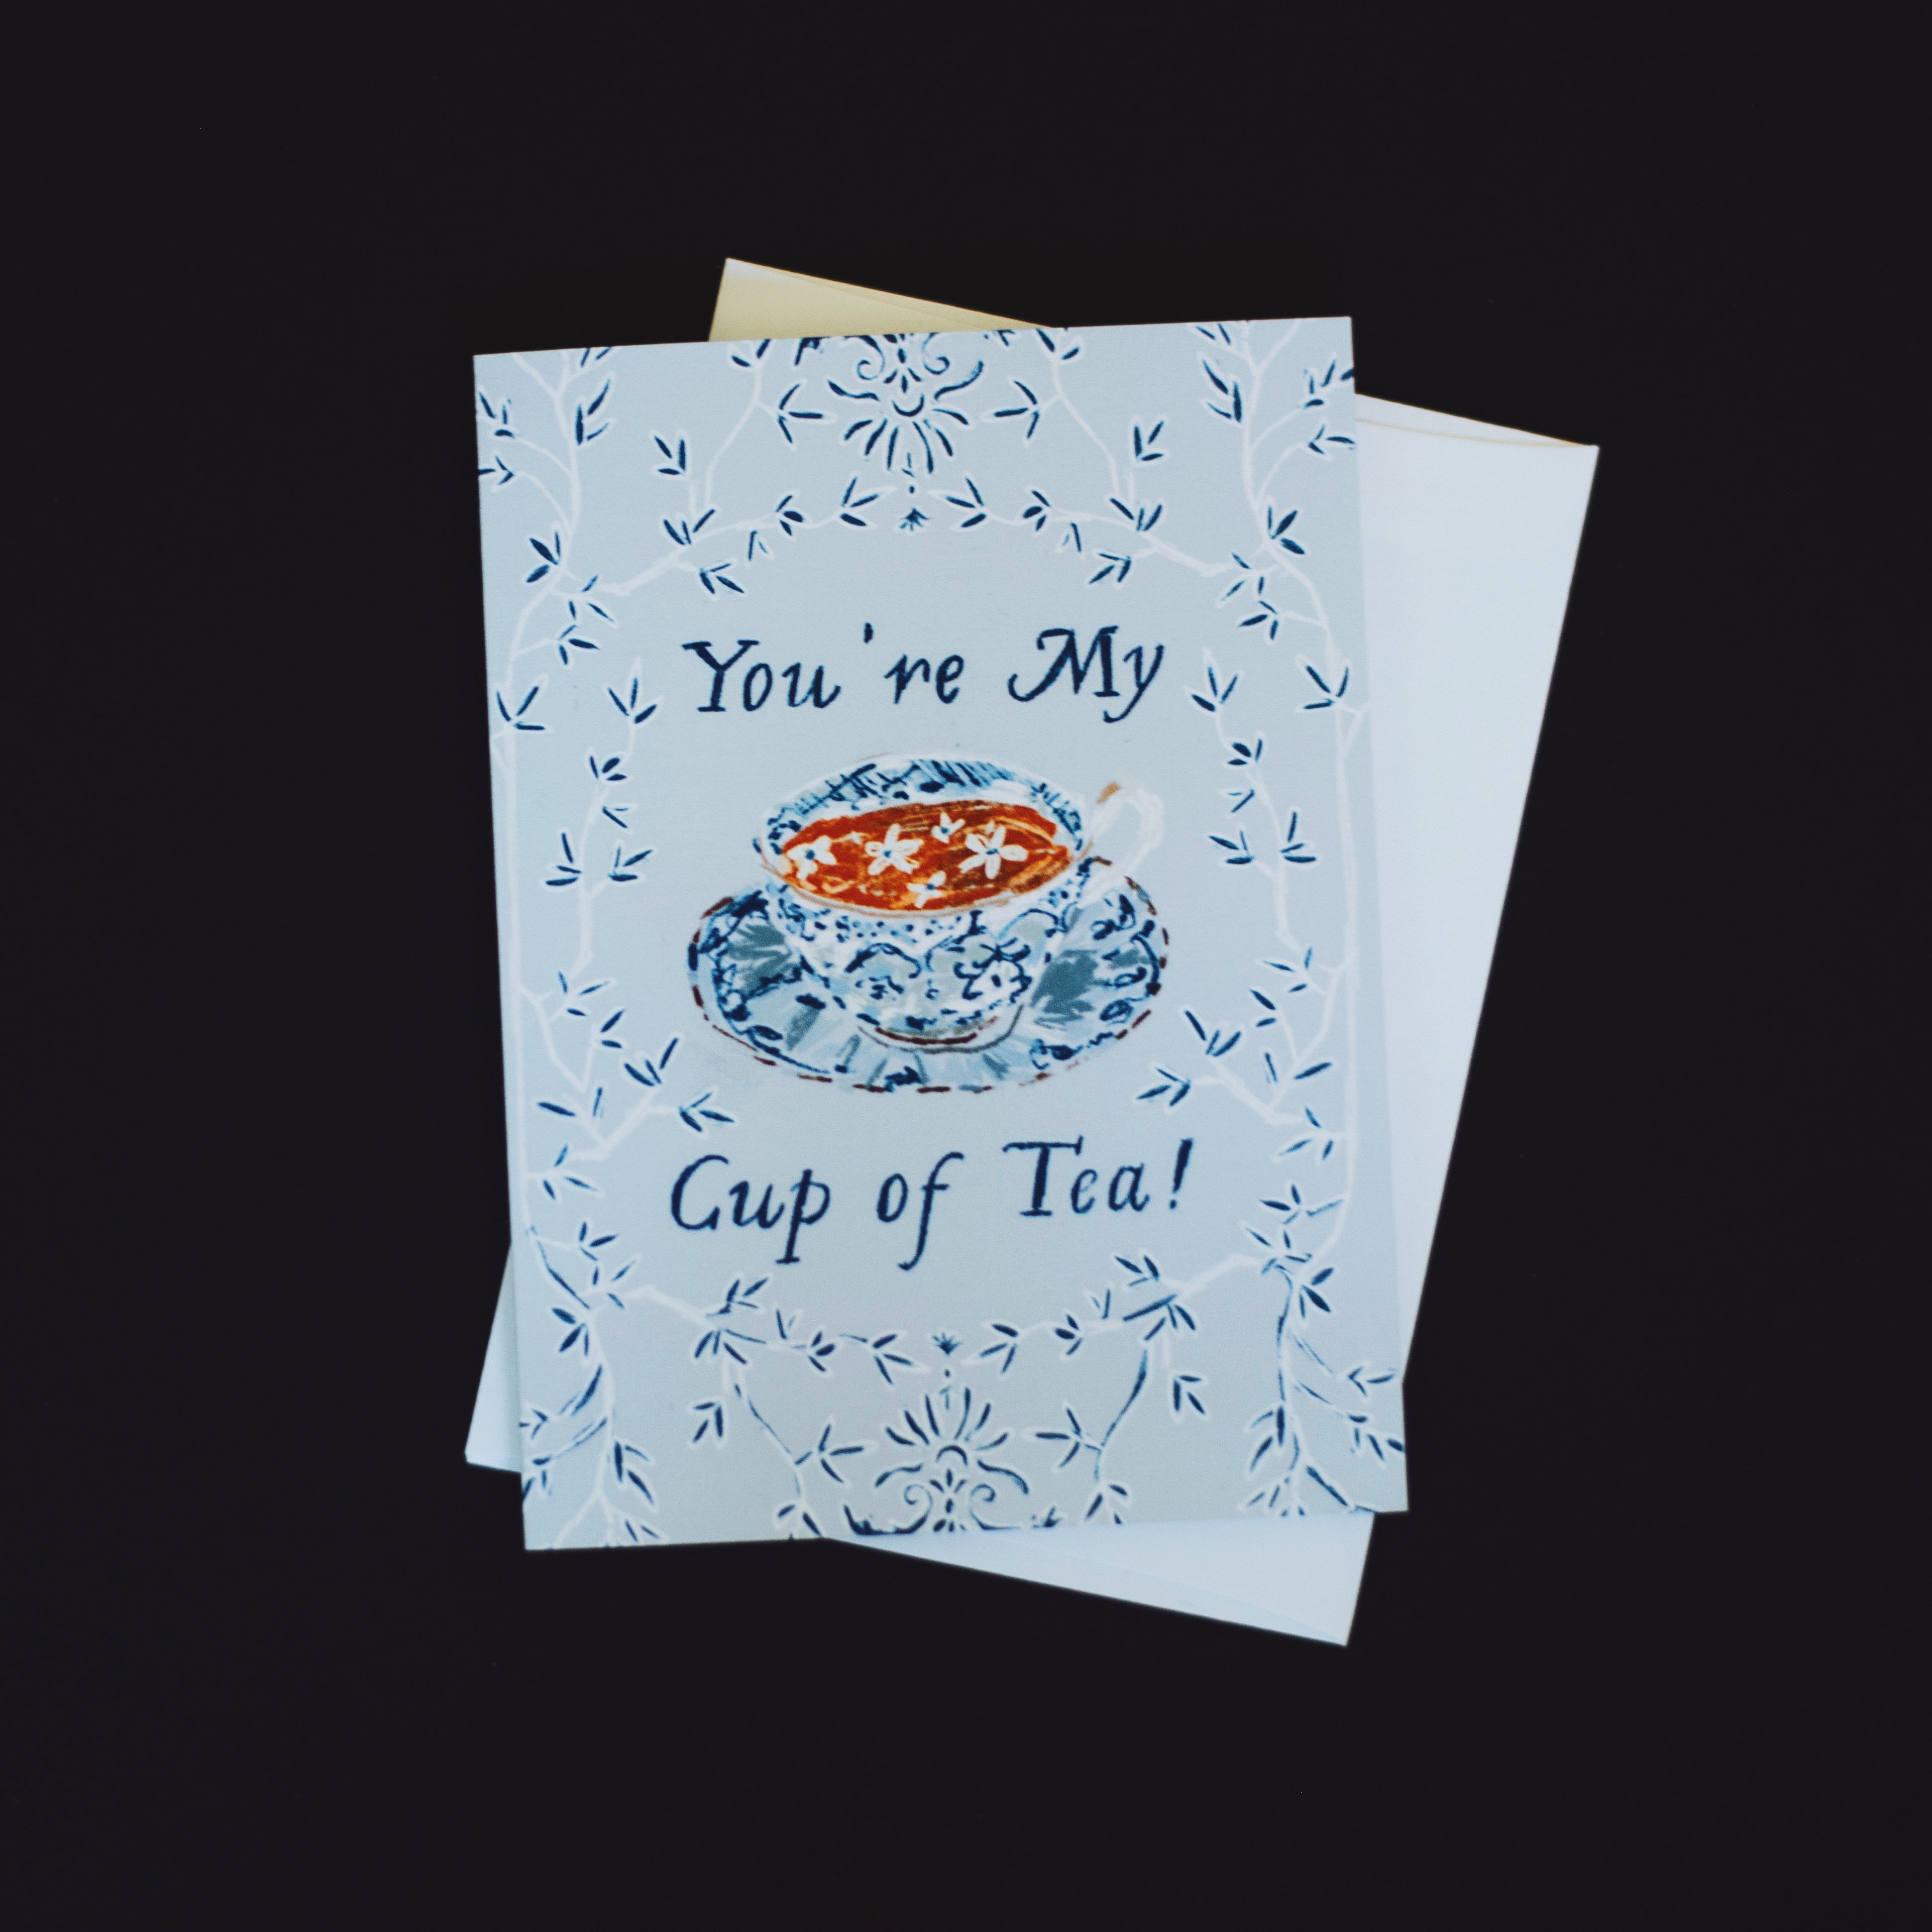 You're My Cup of Tea!